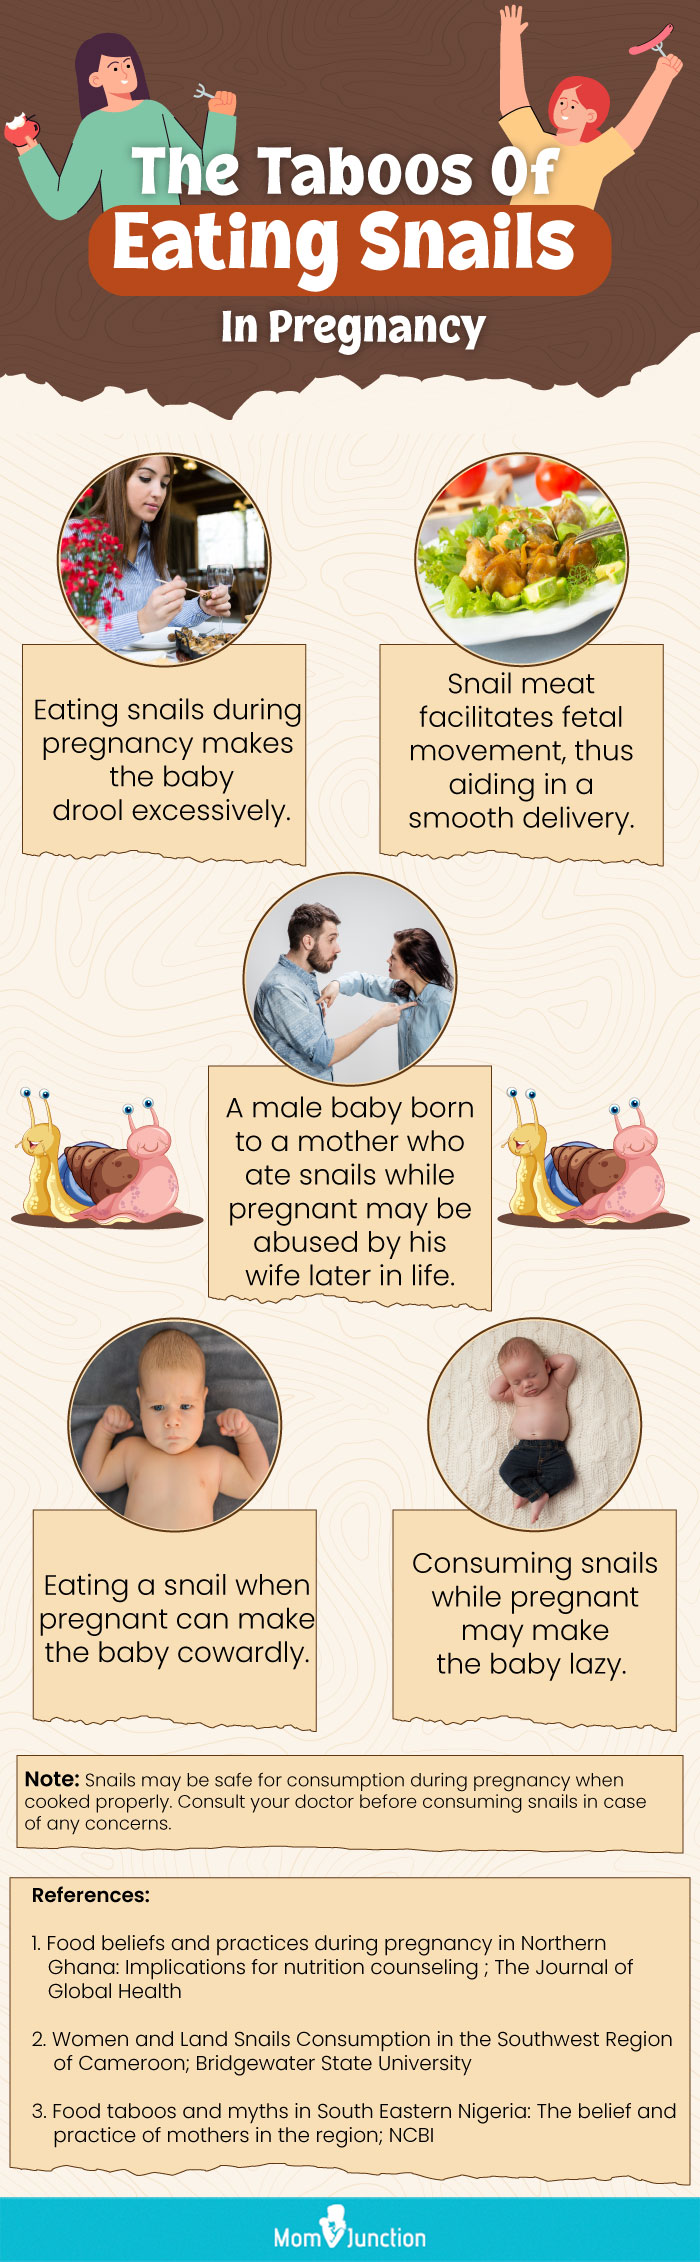 the taboos of eating snails in pregnancy (infographic)